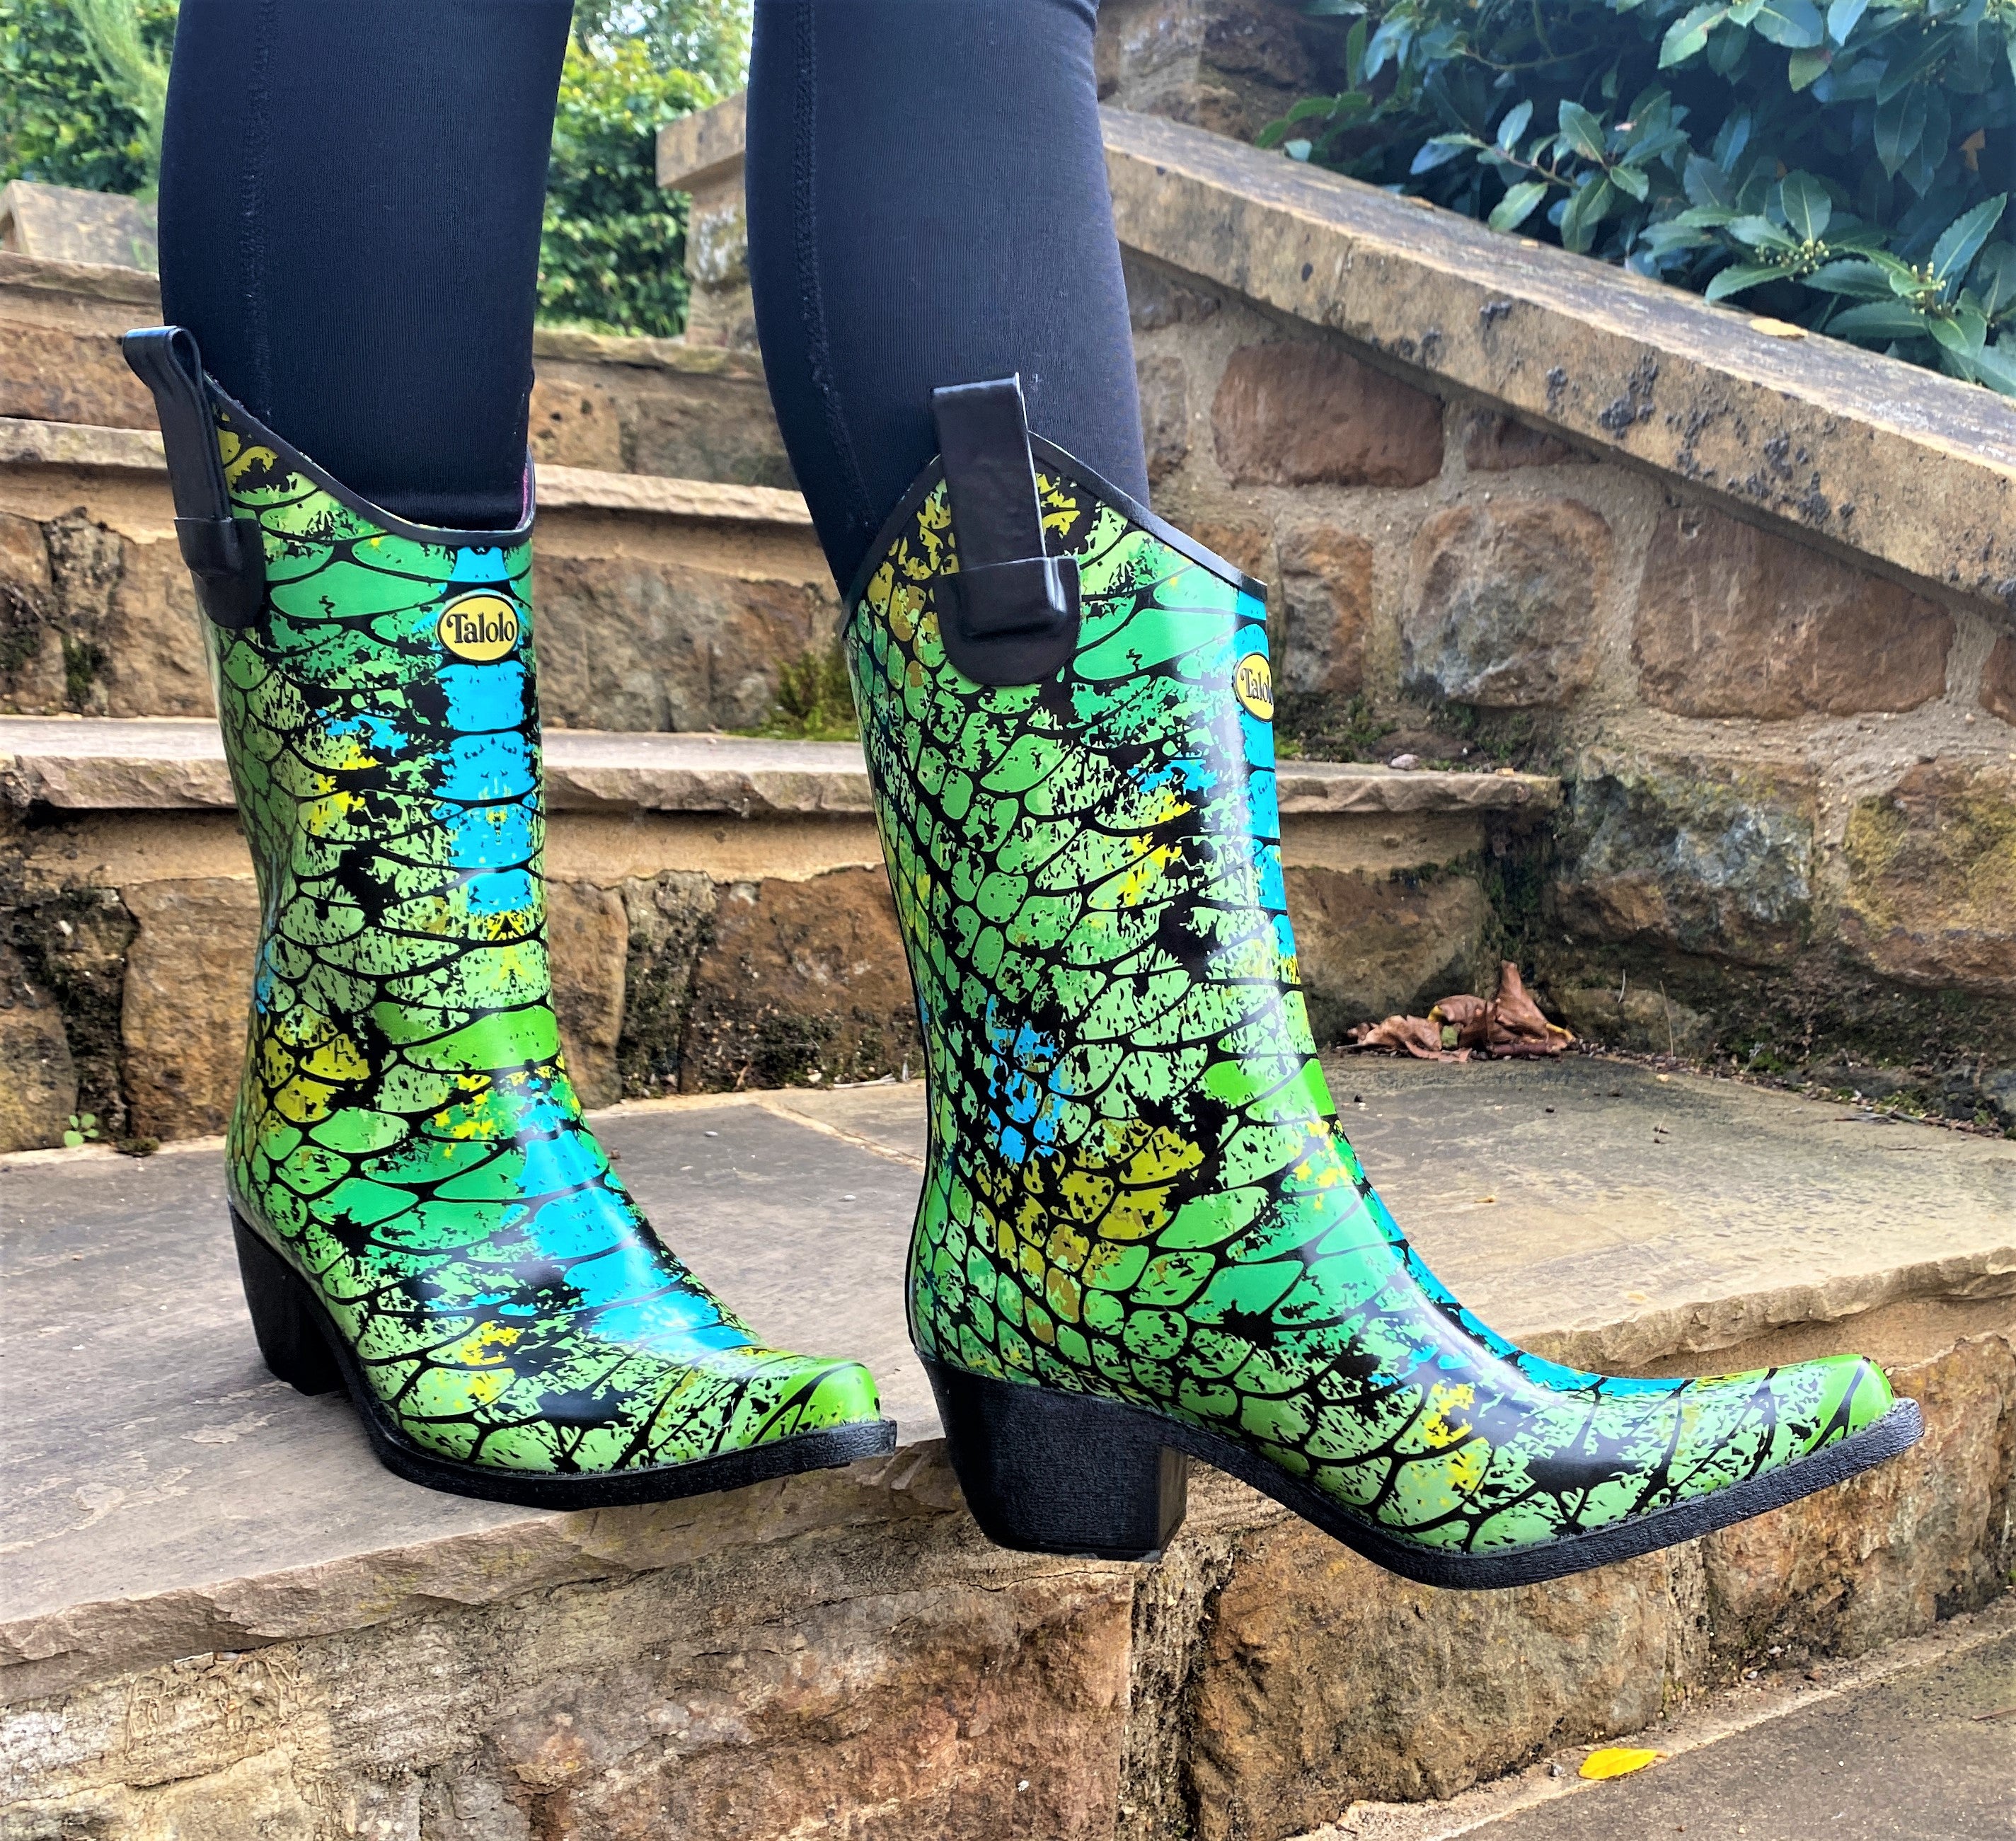 Make heads turn in in these utterly fabulous and exotic Talolo Women's Peacock green and blue pointed cowboy welly boots that have a 3cm heel and cut close to the leg for a flattering look. Lined for comfort.